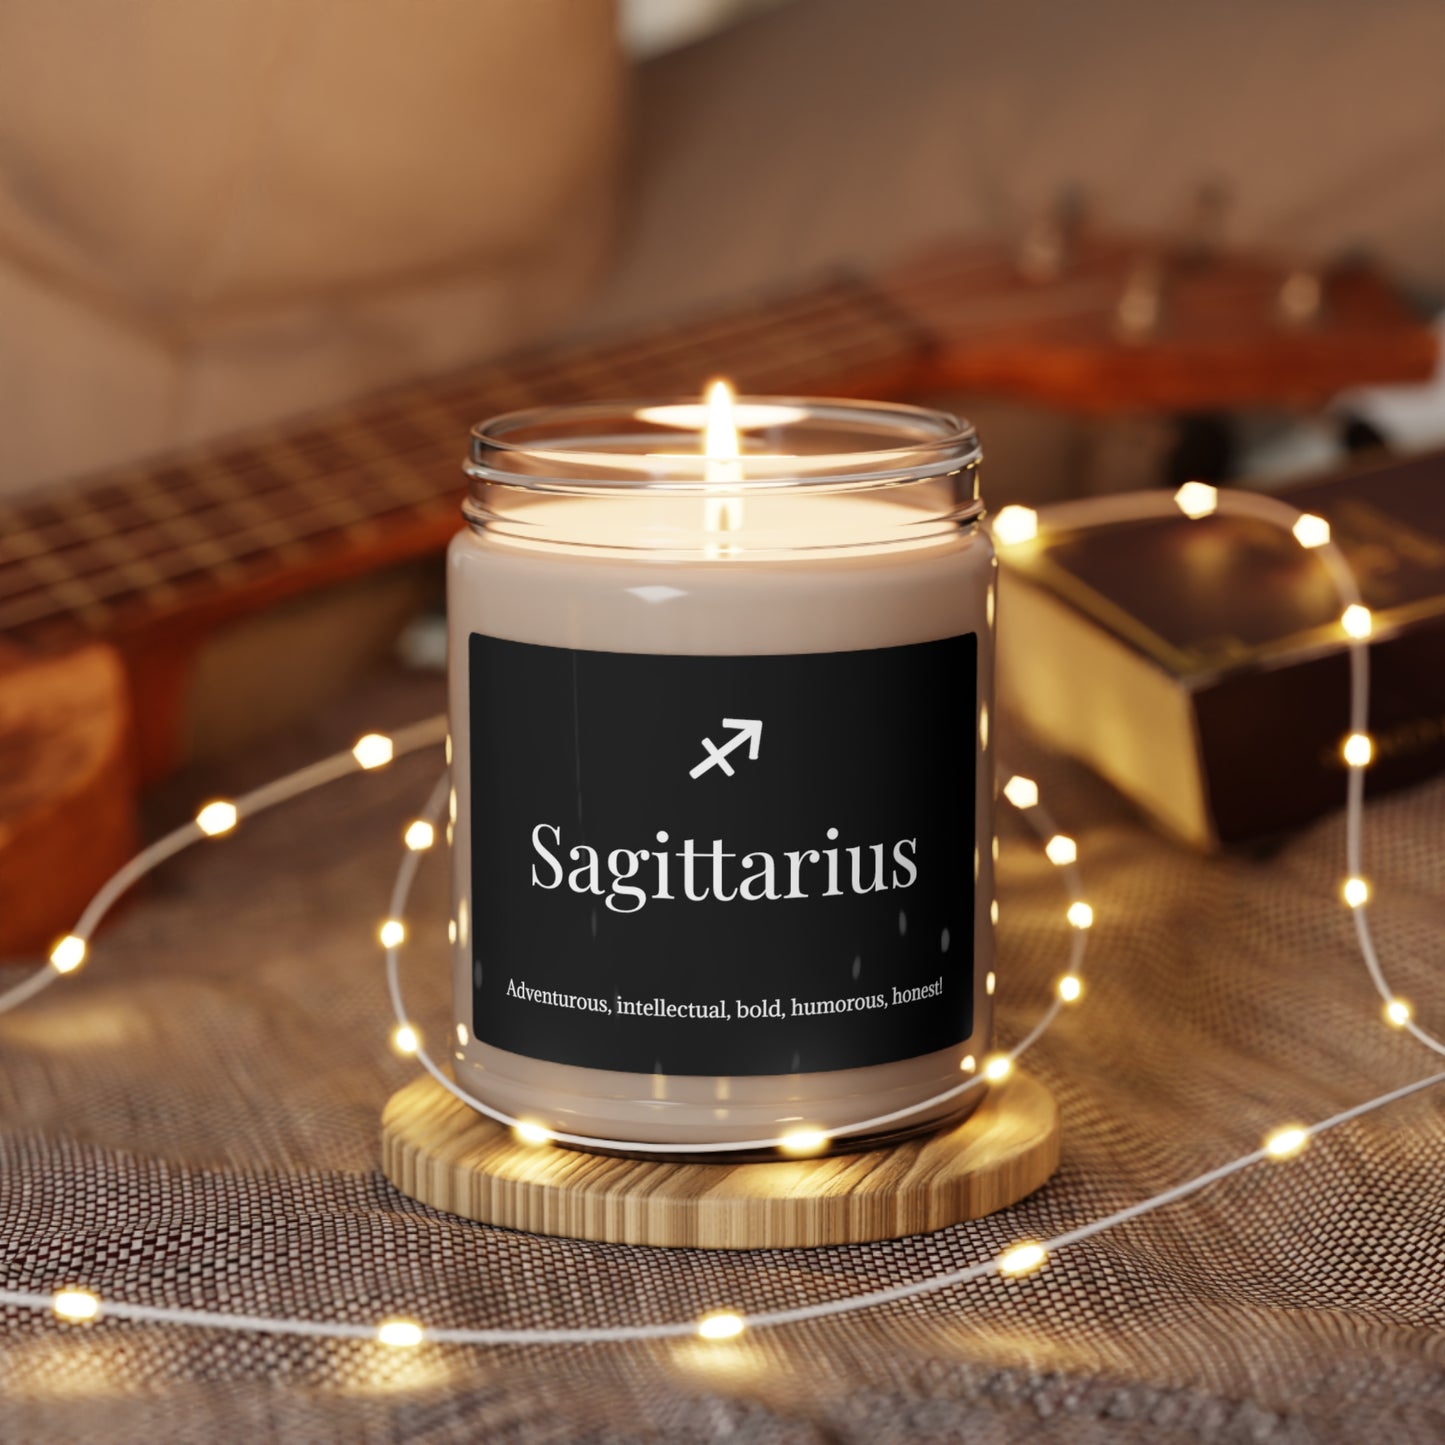 Sagittarius Scented Soy Candle